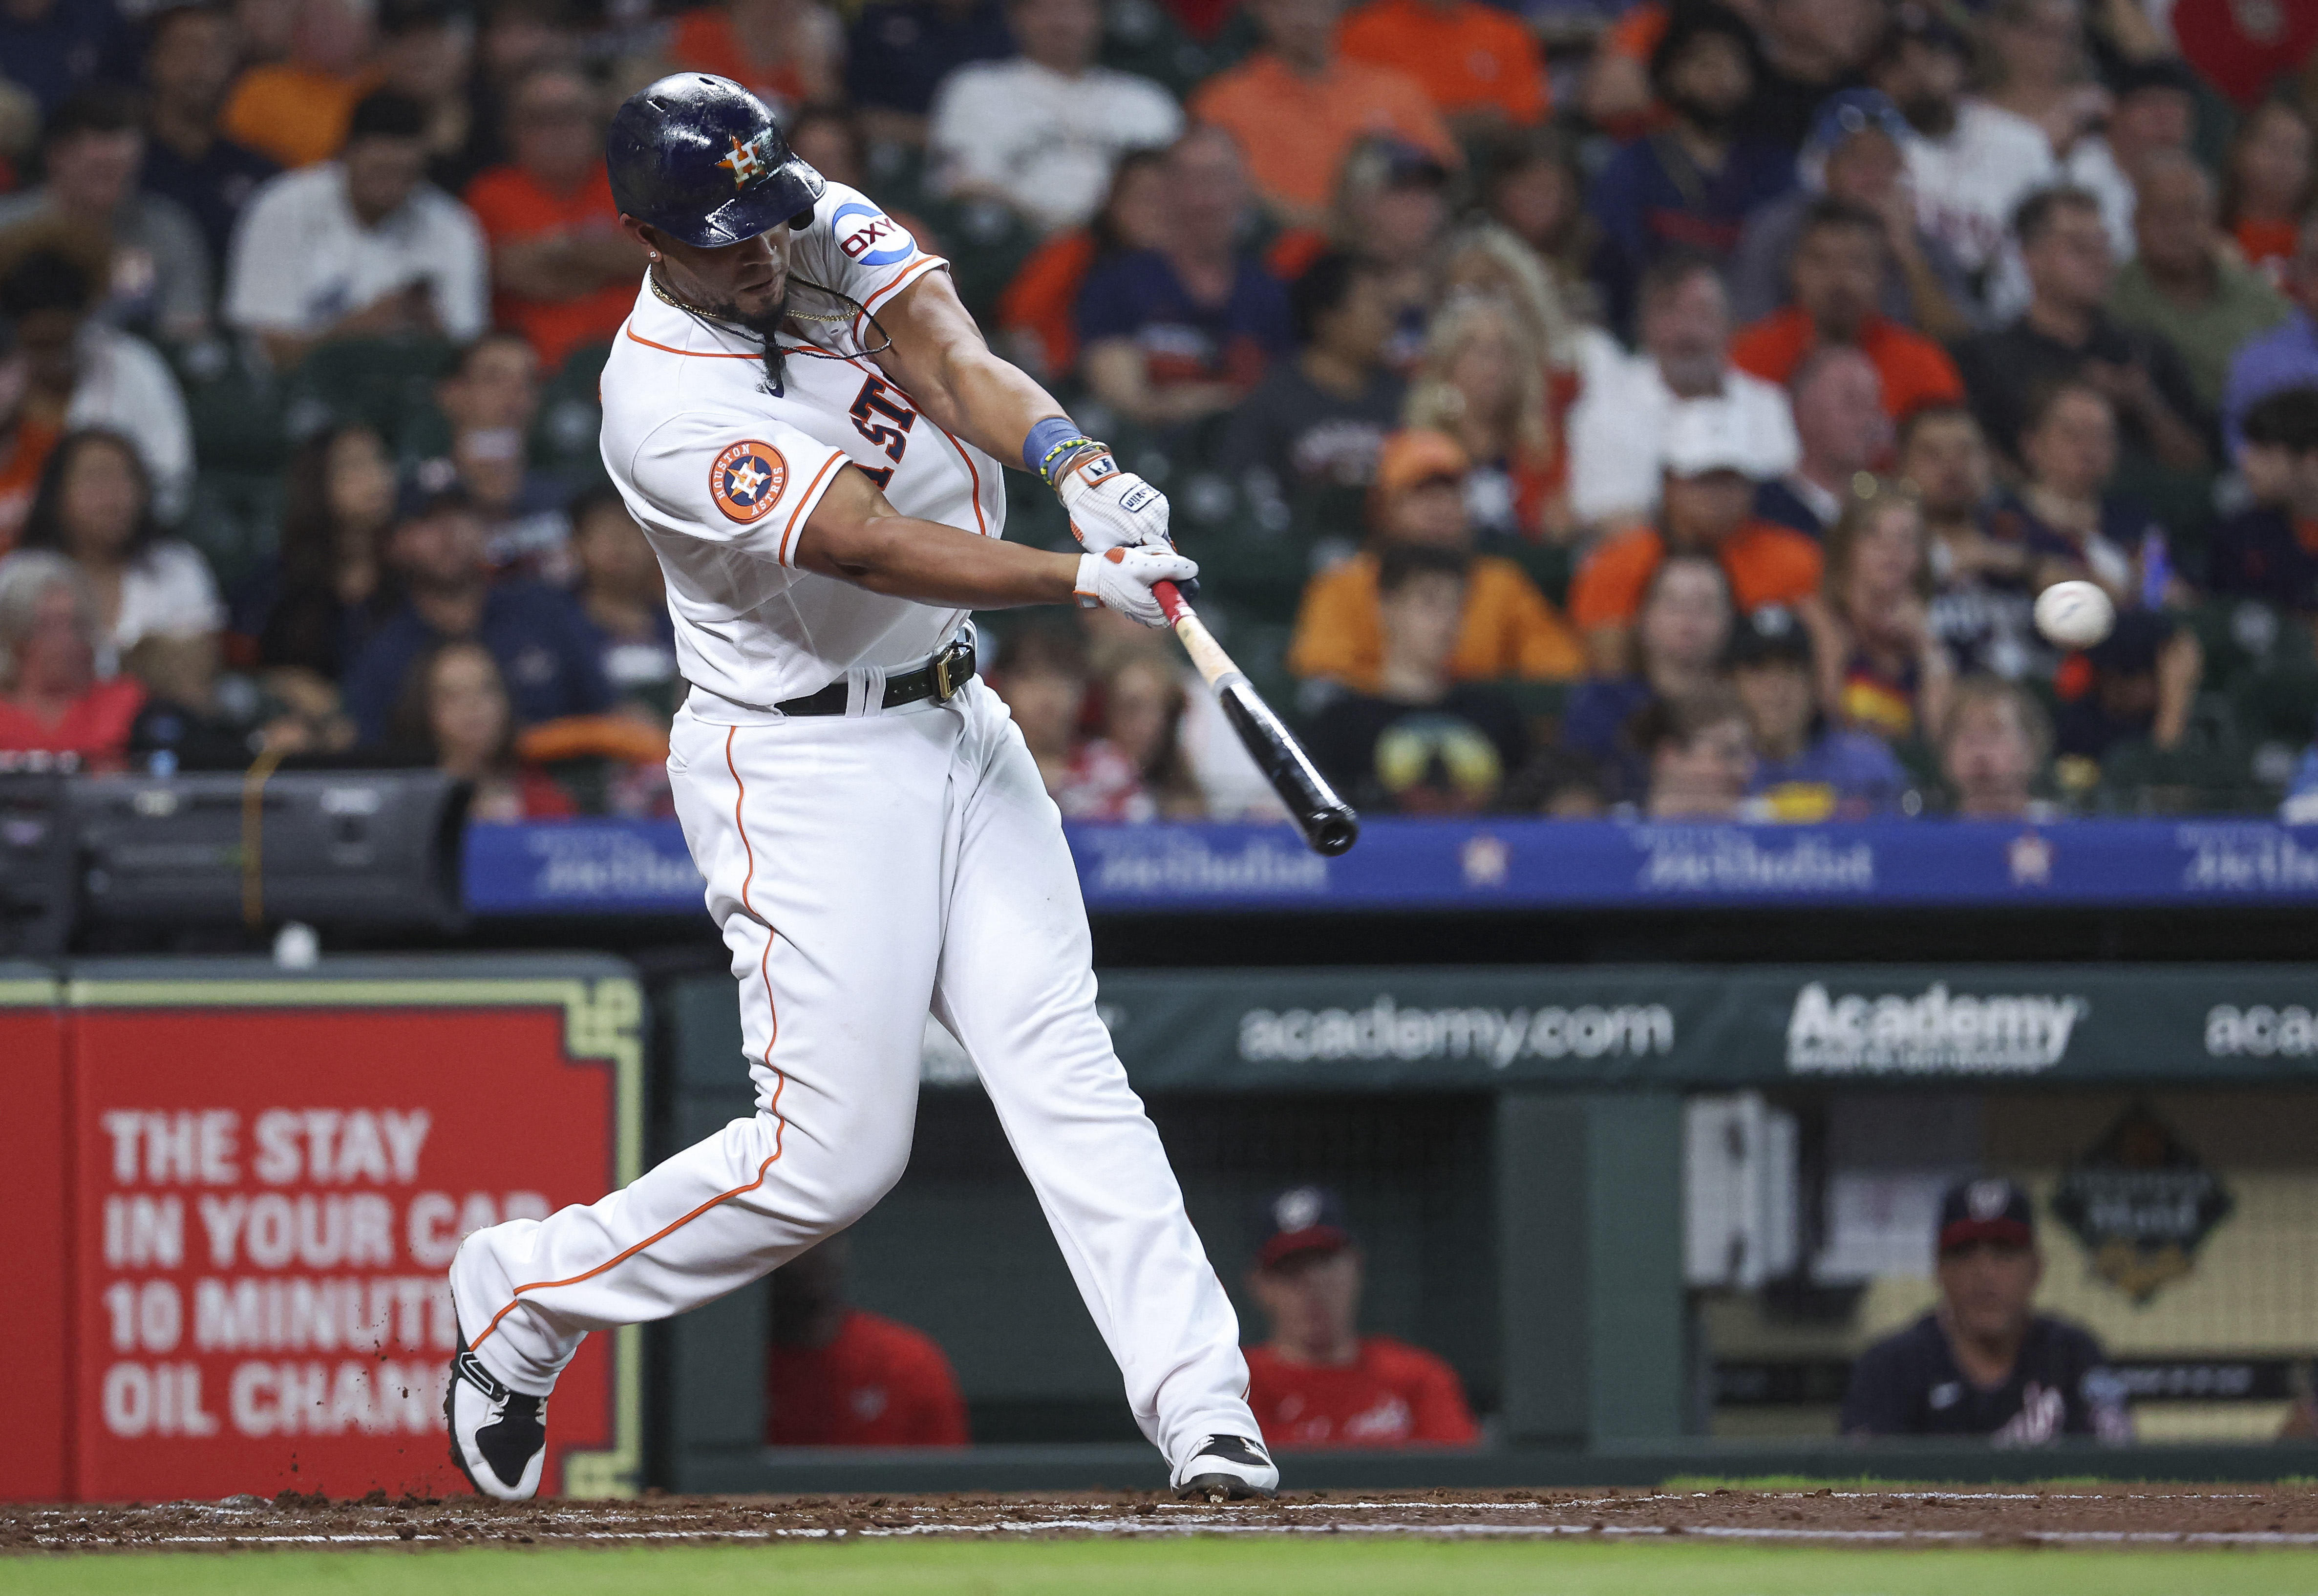 Houston Astros Need Bigger Boat To Reel In Washington Nationals